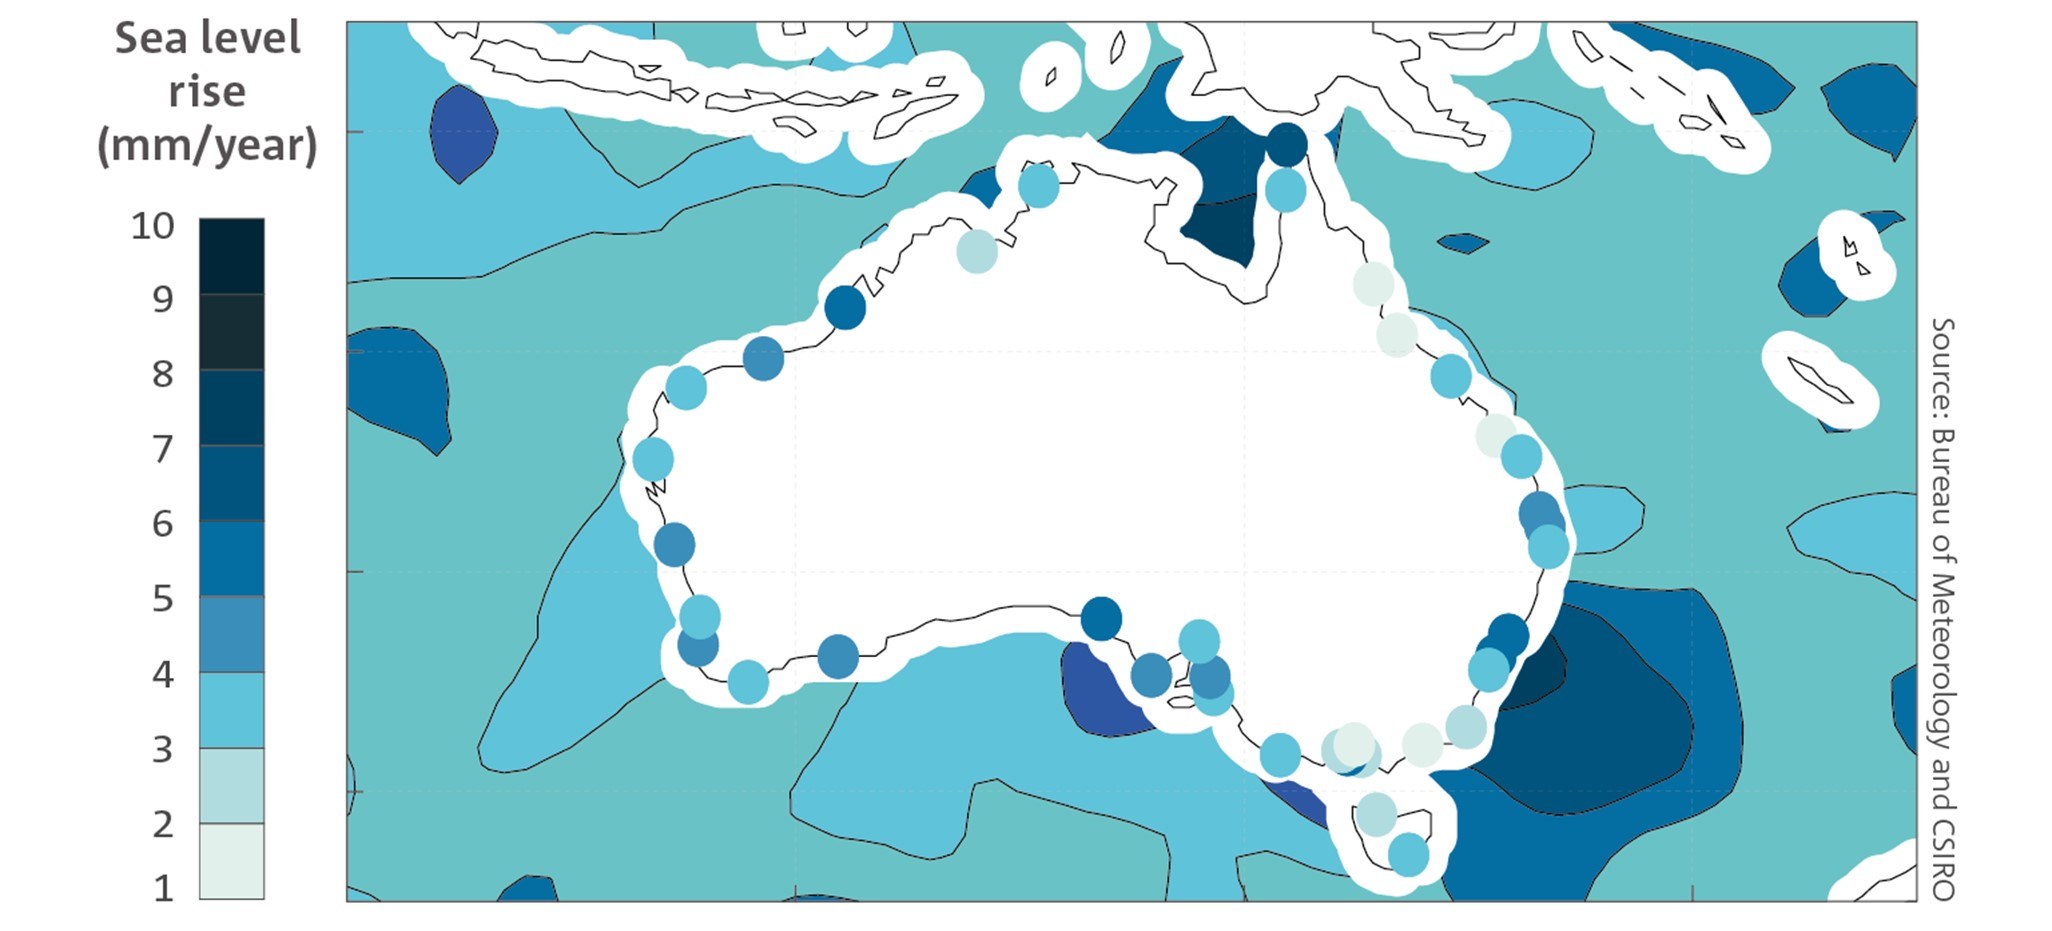 The rate of offshore sea-level rise around Australia measured using satellite altimetry from 1993 to 2020 and onshore rate of sea-level rise (coastal points) from the ANCHORS multi-decadal tide gauge dataset. The colour scale applies to both the contour (satellite altimetry) and dots (tide gauges) observations.